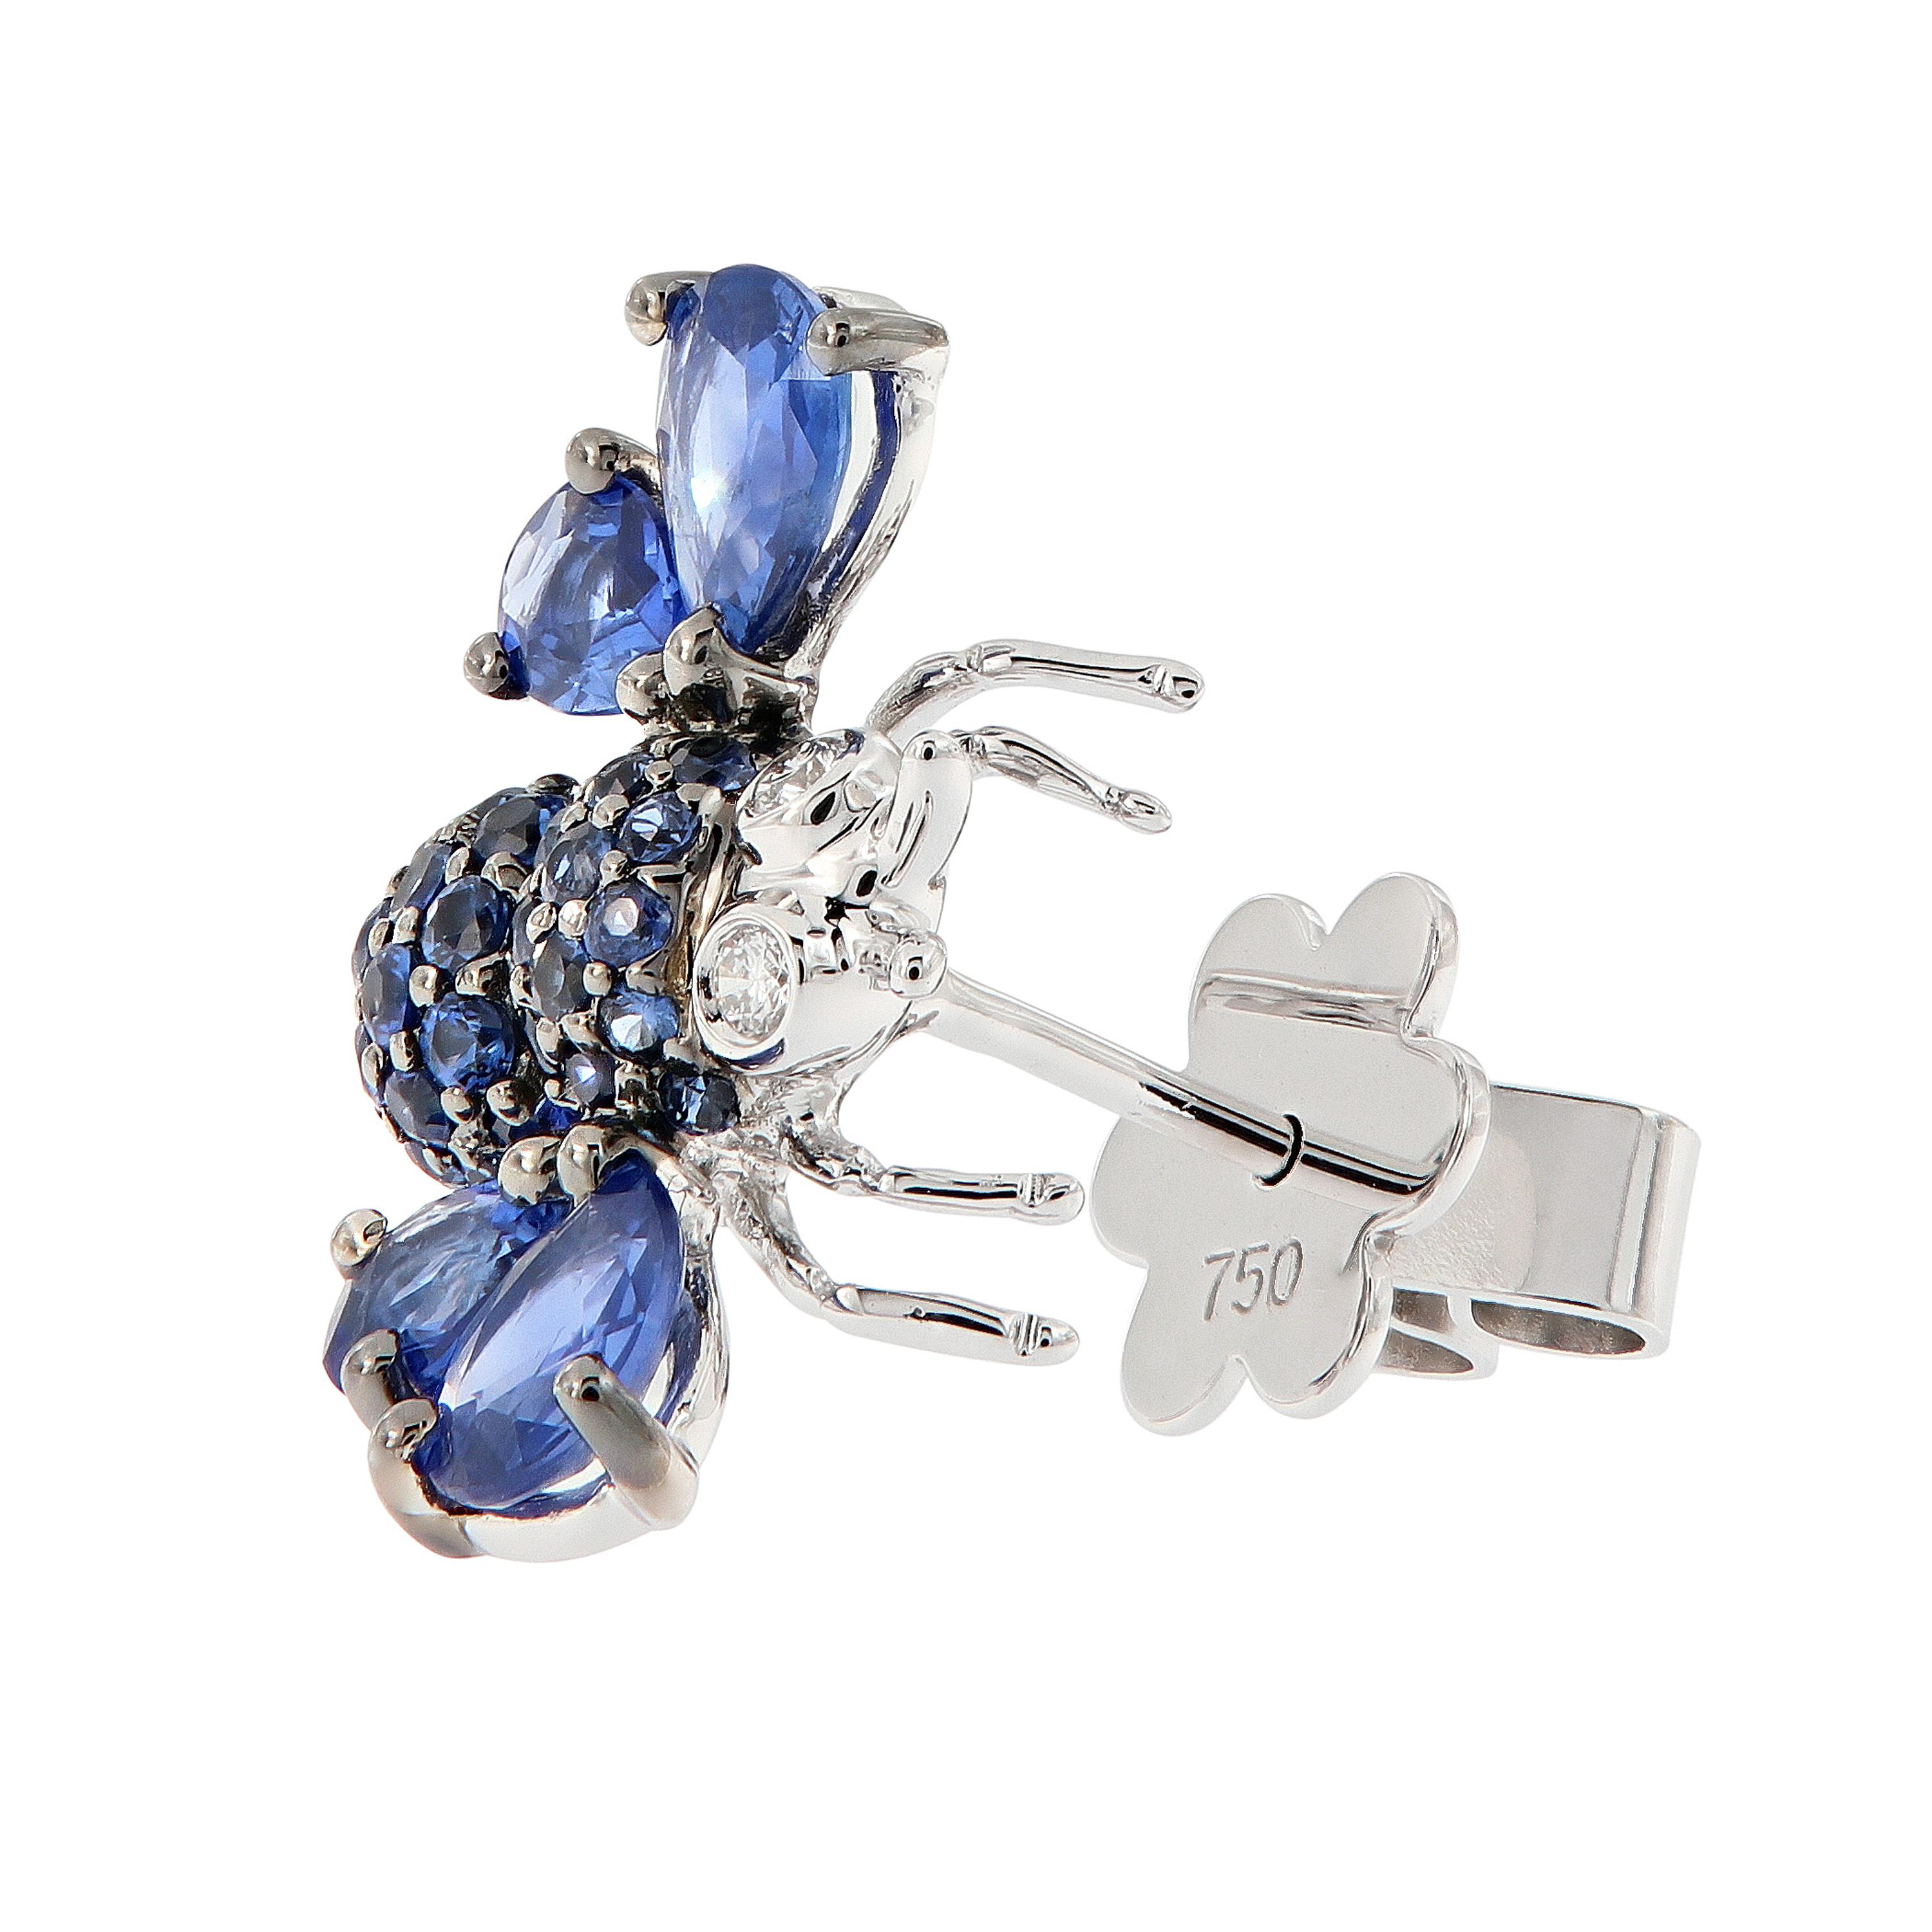 Beautiful bee earrings expertly crafted in 18k white gold. Round cut blue sapphires accent the body of the bee with pear shaped blue sapphire wings and diamond eyes. Weigh 5.4 grams.

Sapphires 2.75 cttw
Diamonds 0.05 cttw